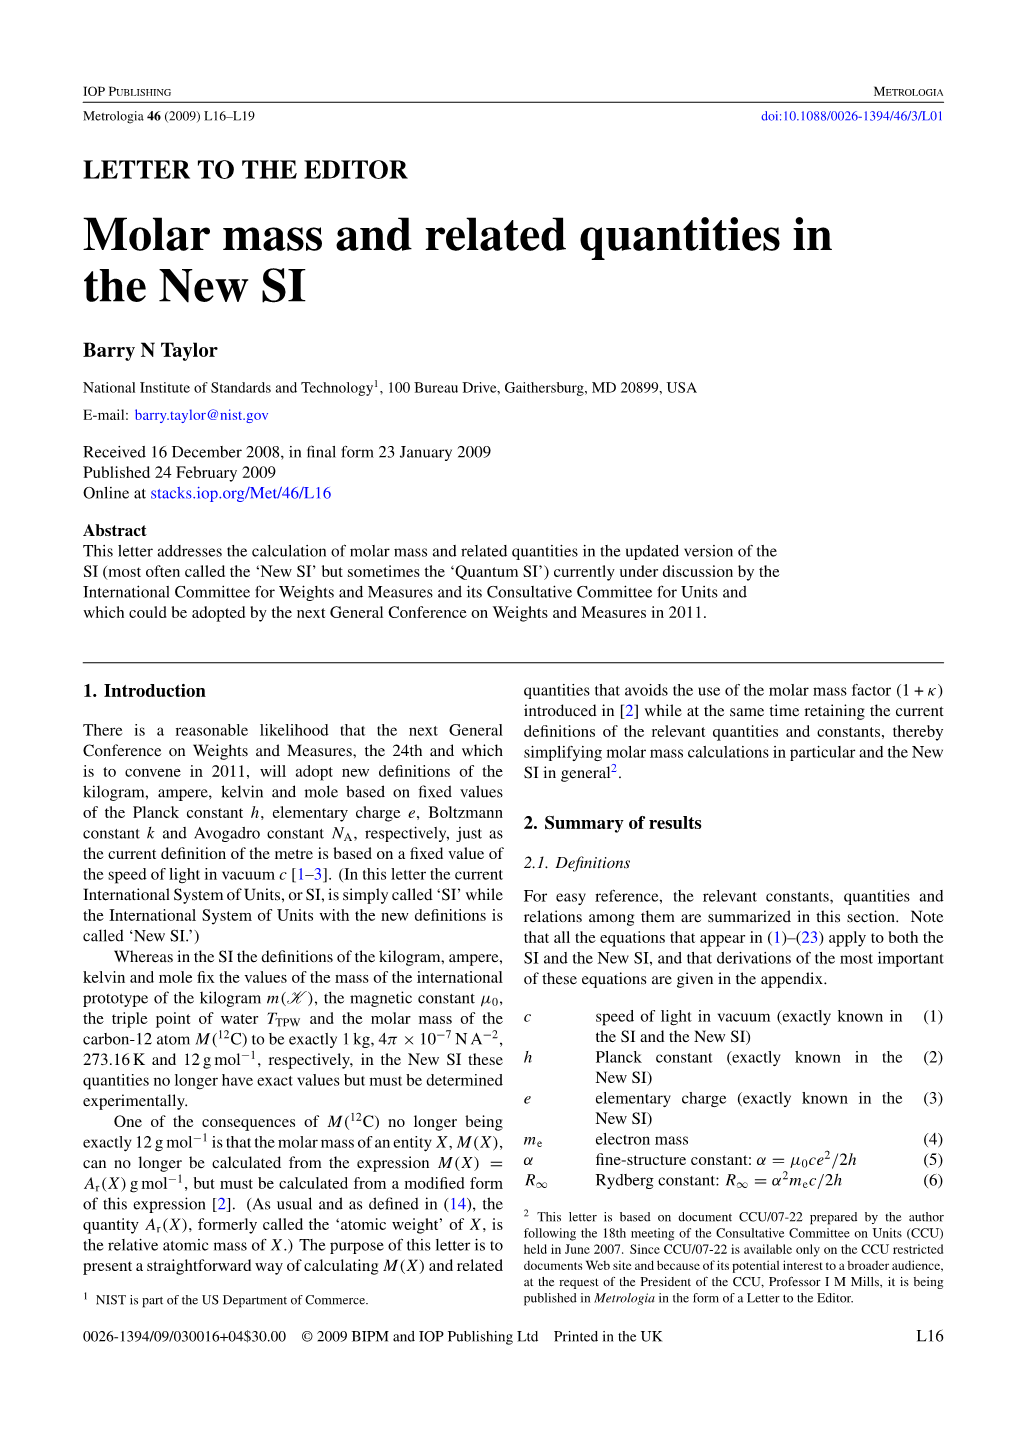 LETTER to the EDITOR Molar Mass and Related Quantities in the New SI